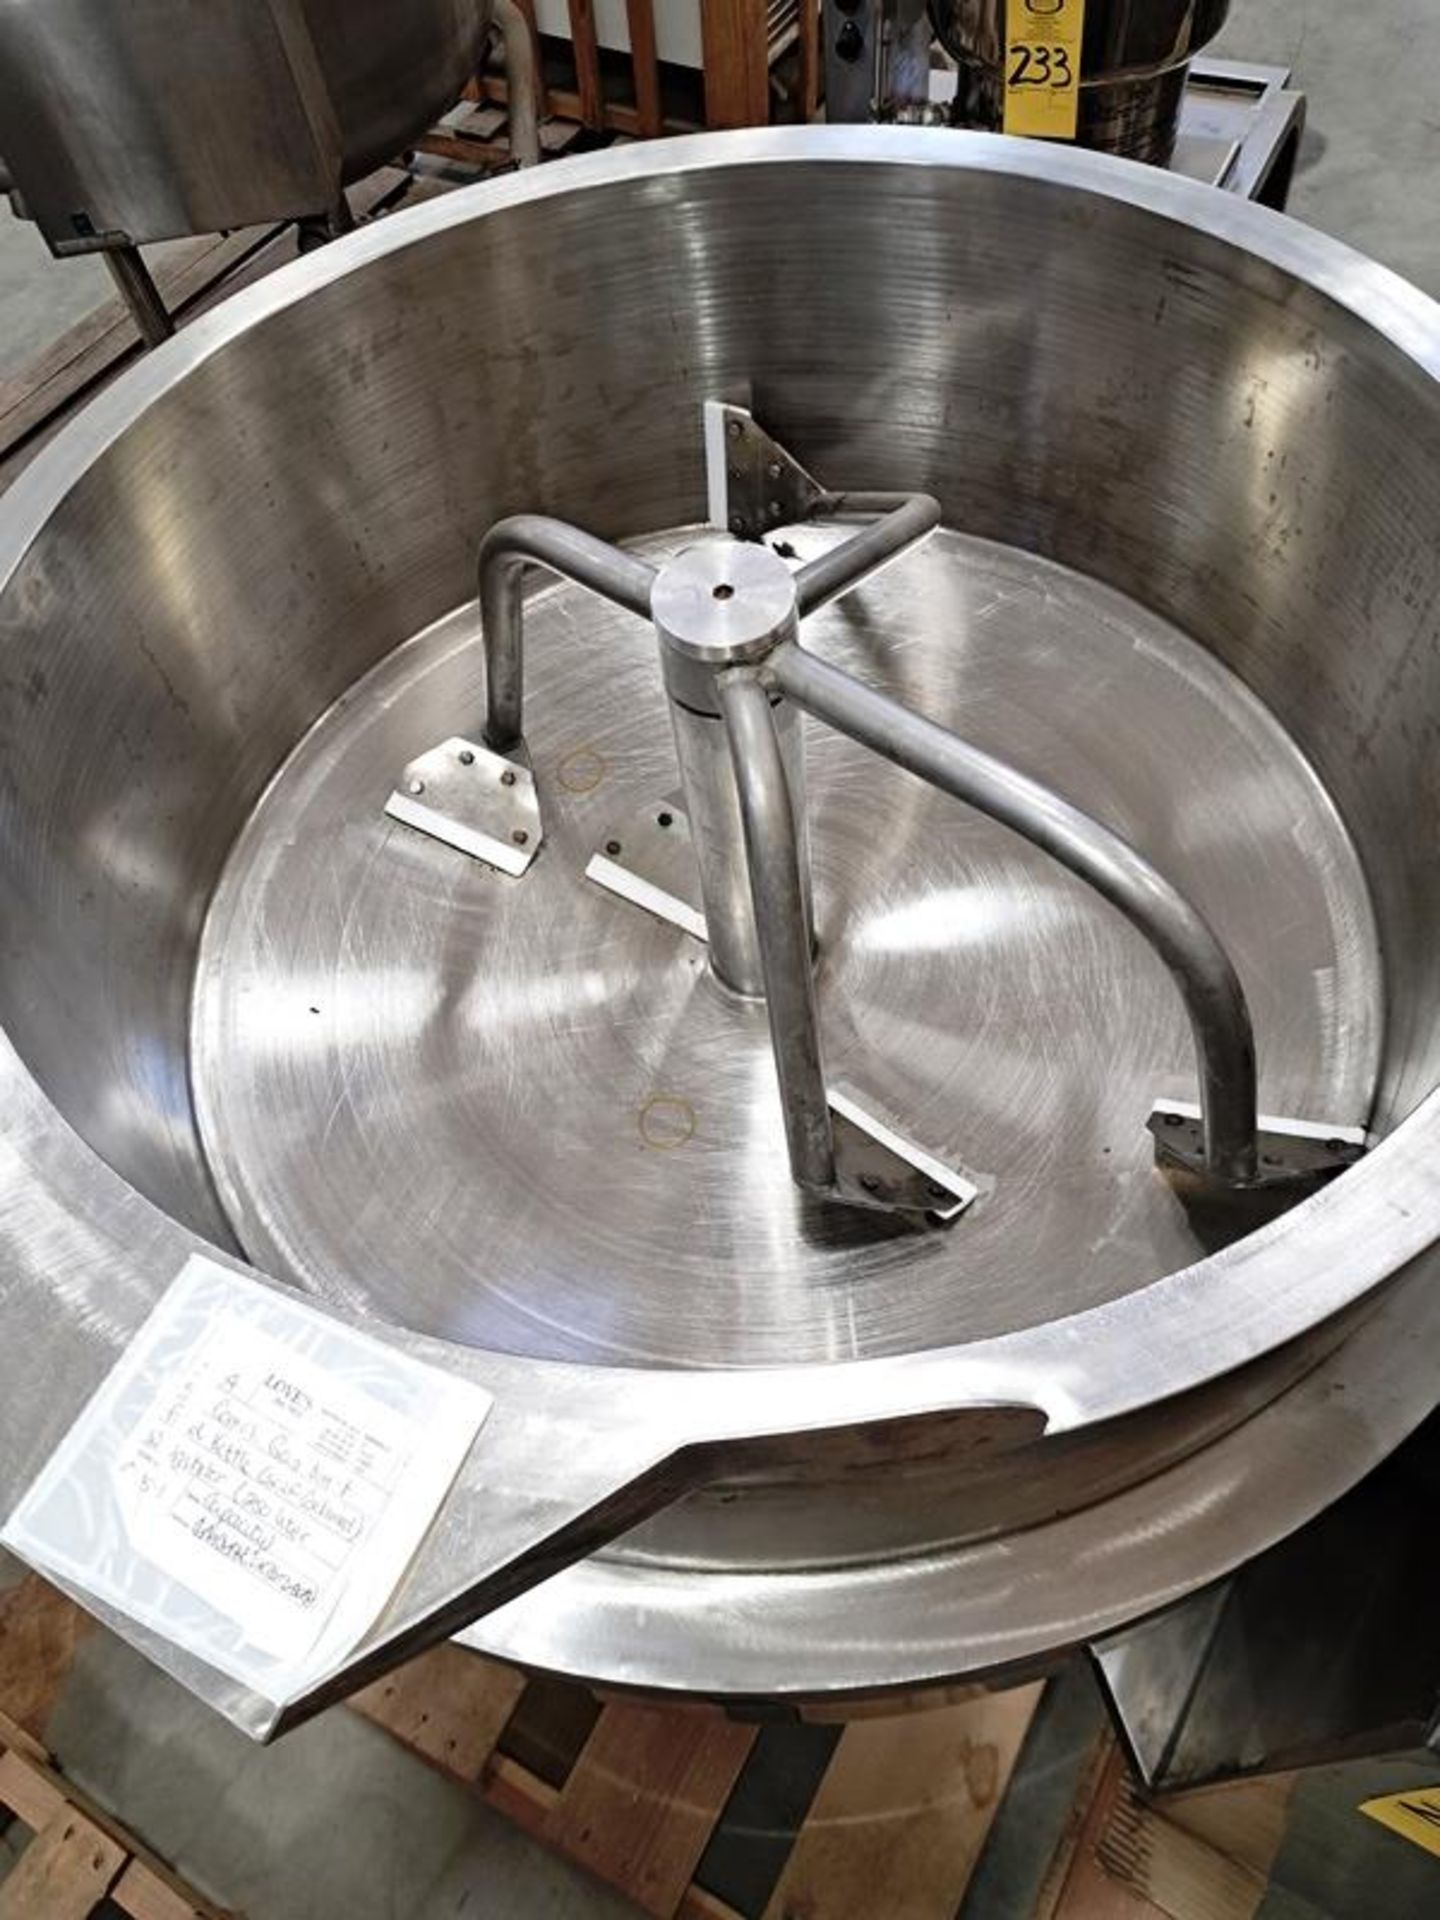 Baoding Jiali Mdl. JL-XKJG-Q Stainless Steel Jacketed Kettle, 150 liter, tilt out with side and - Image 3 of 4